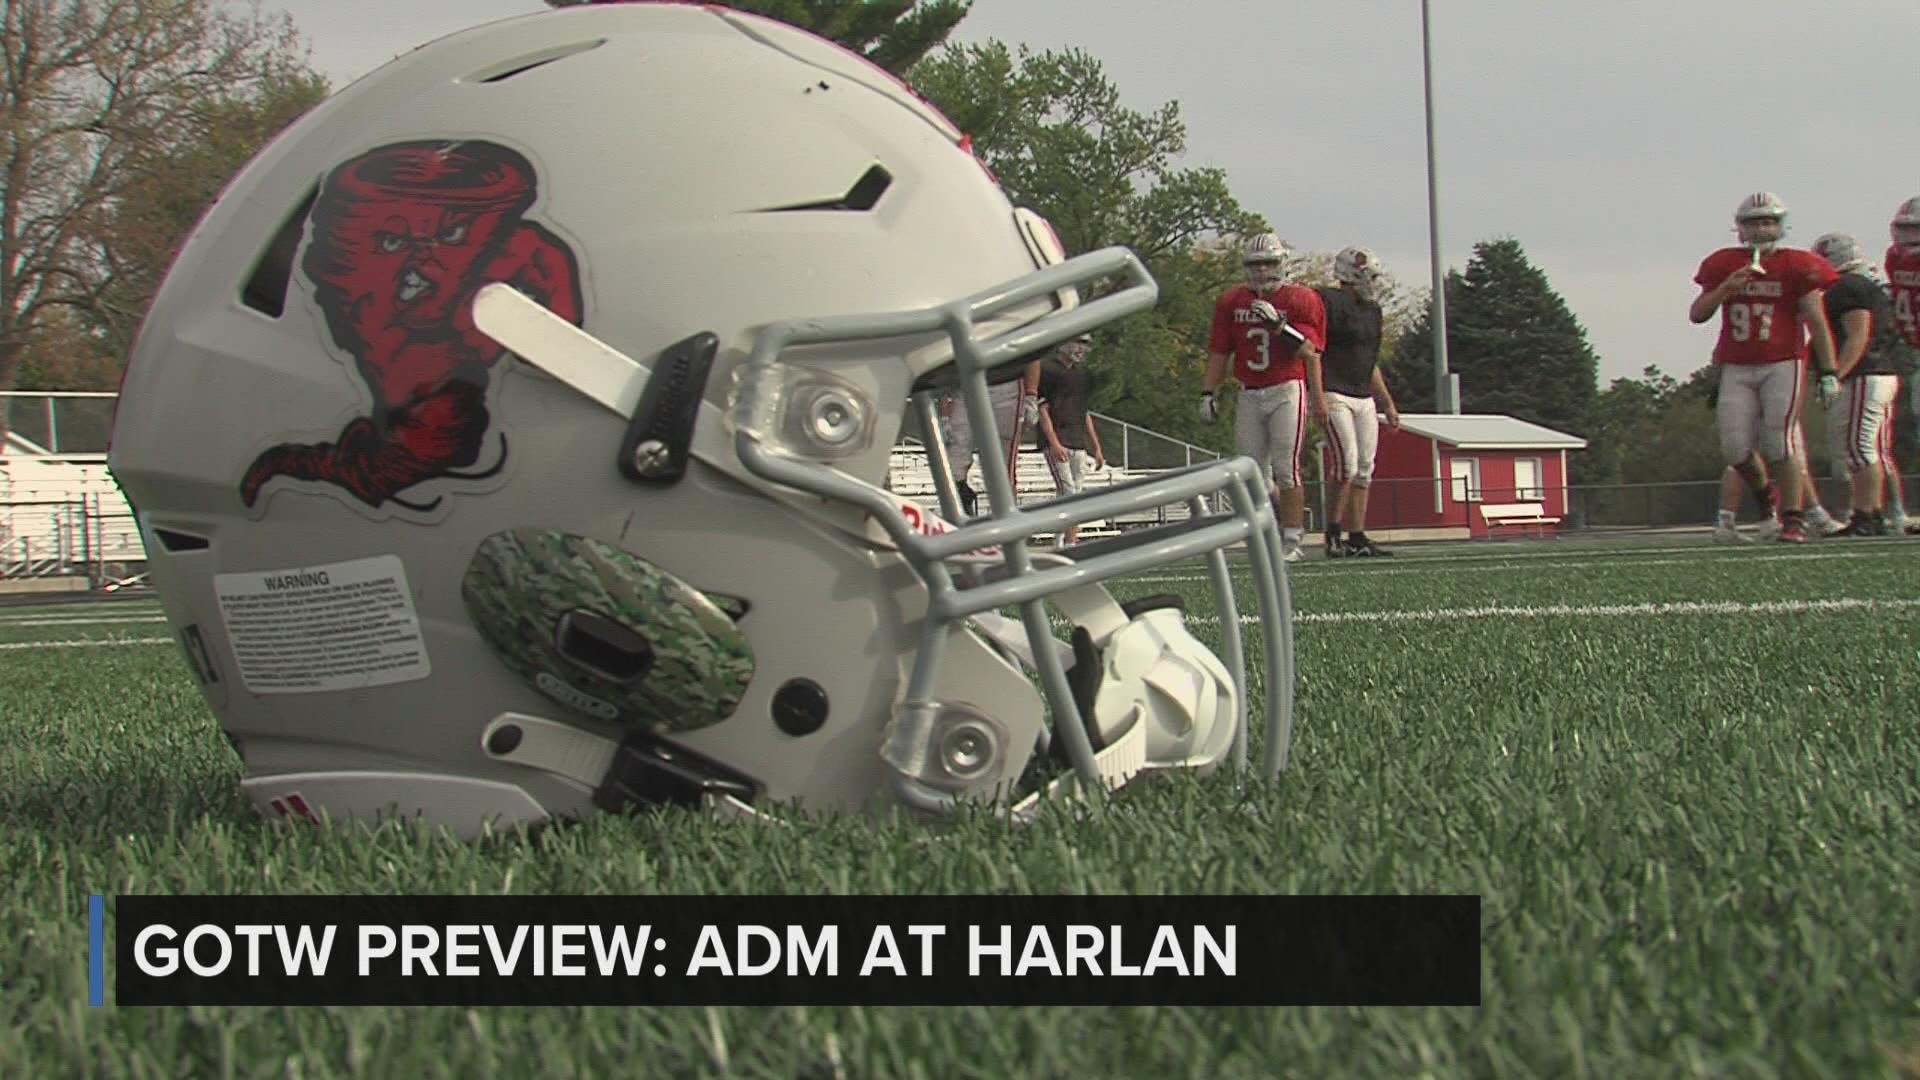 ADM and Harlan are tied for second in the AP's Class 3A rankings.